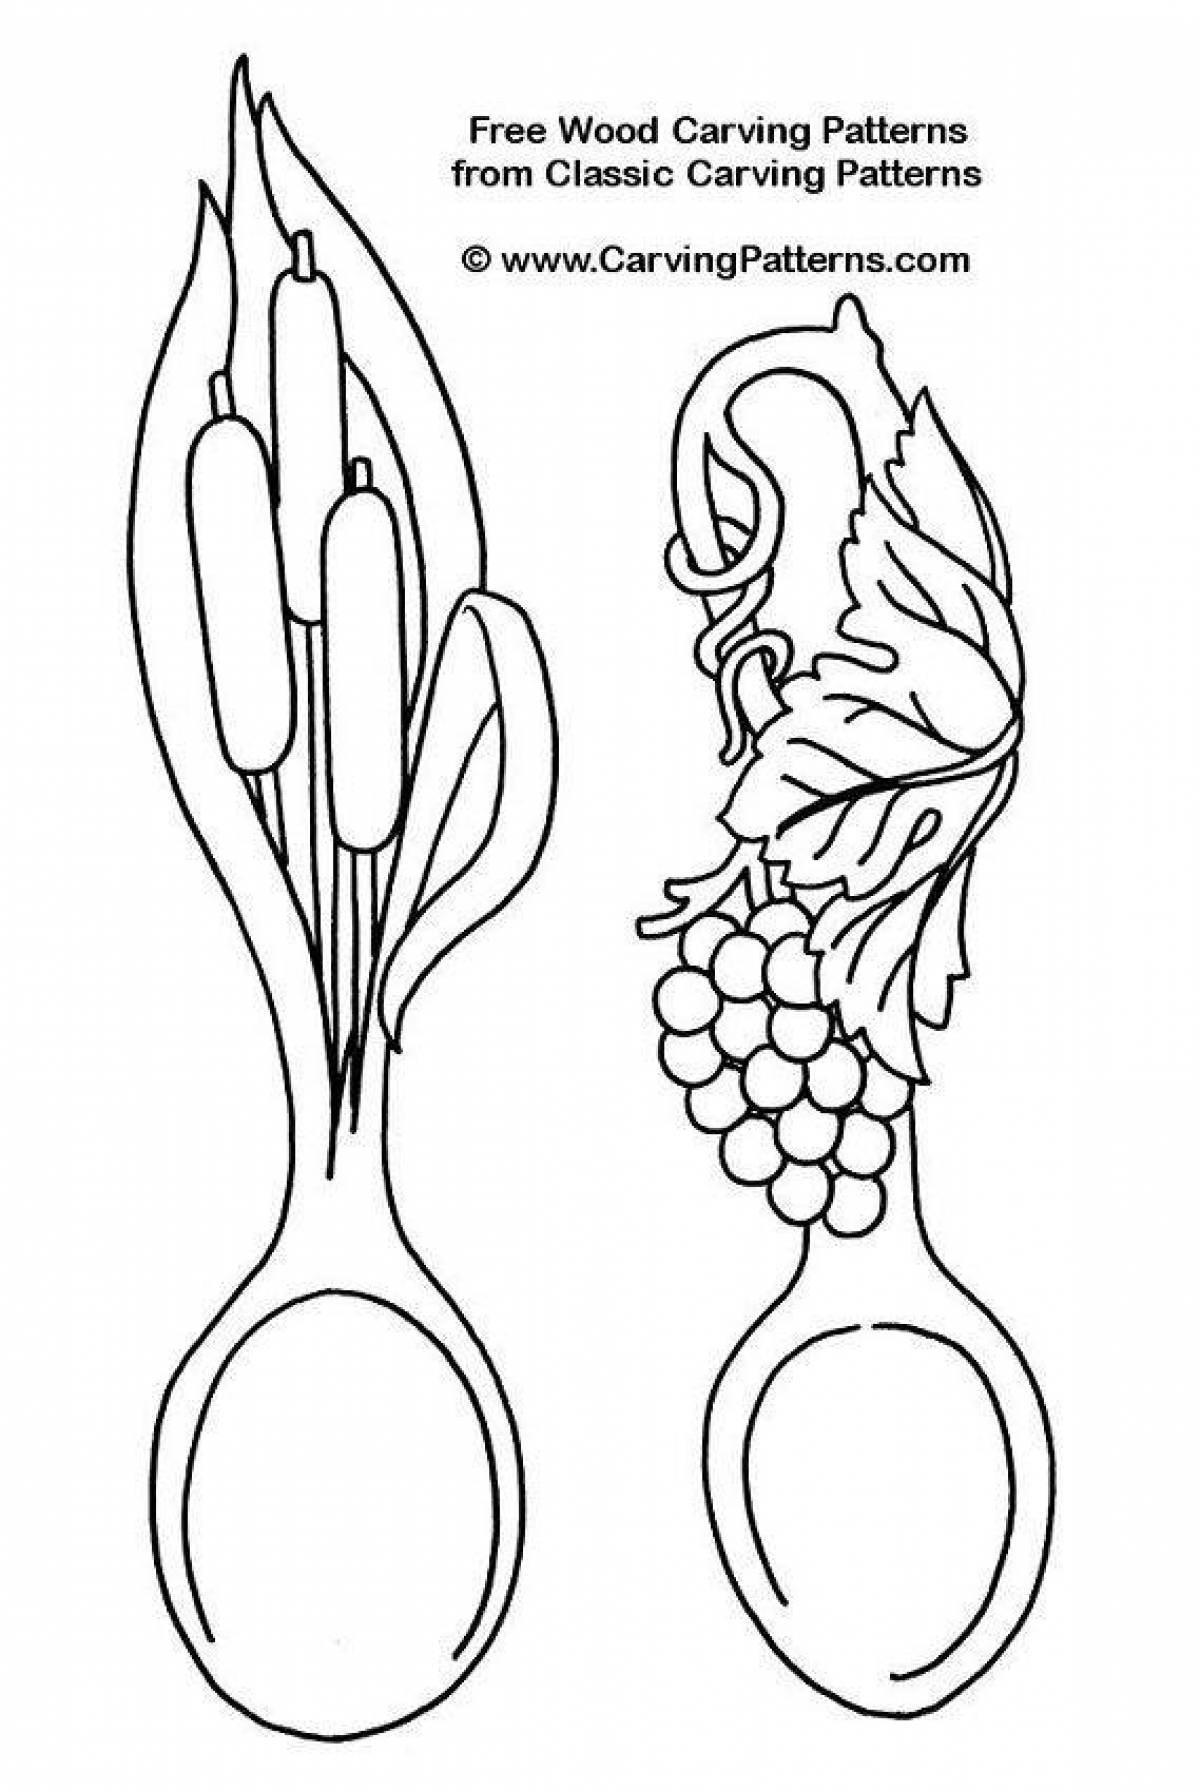 Intricate coloring of a wooden spoon